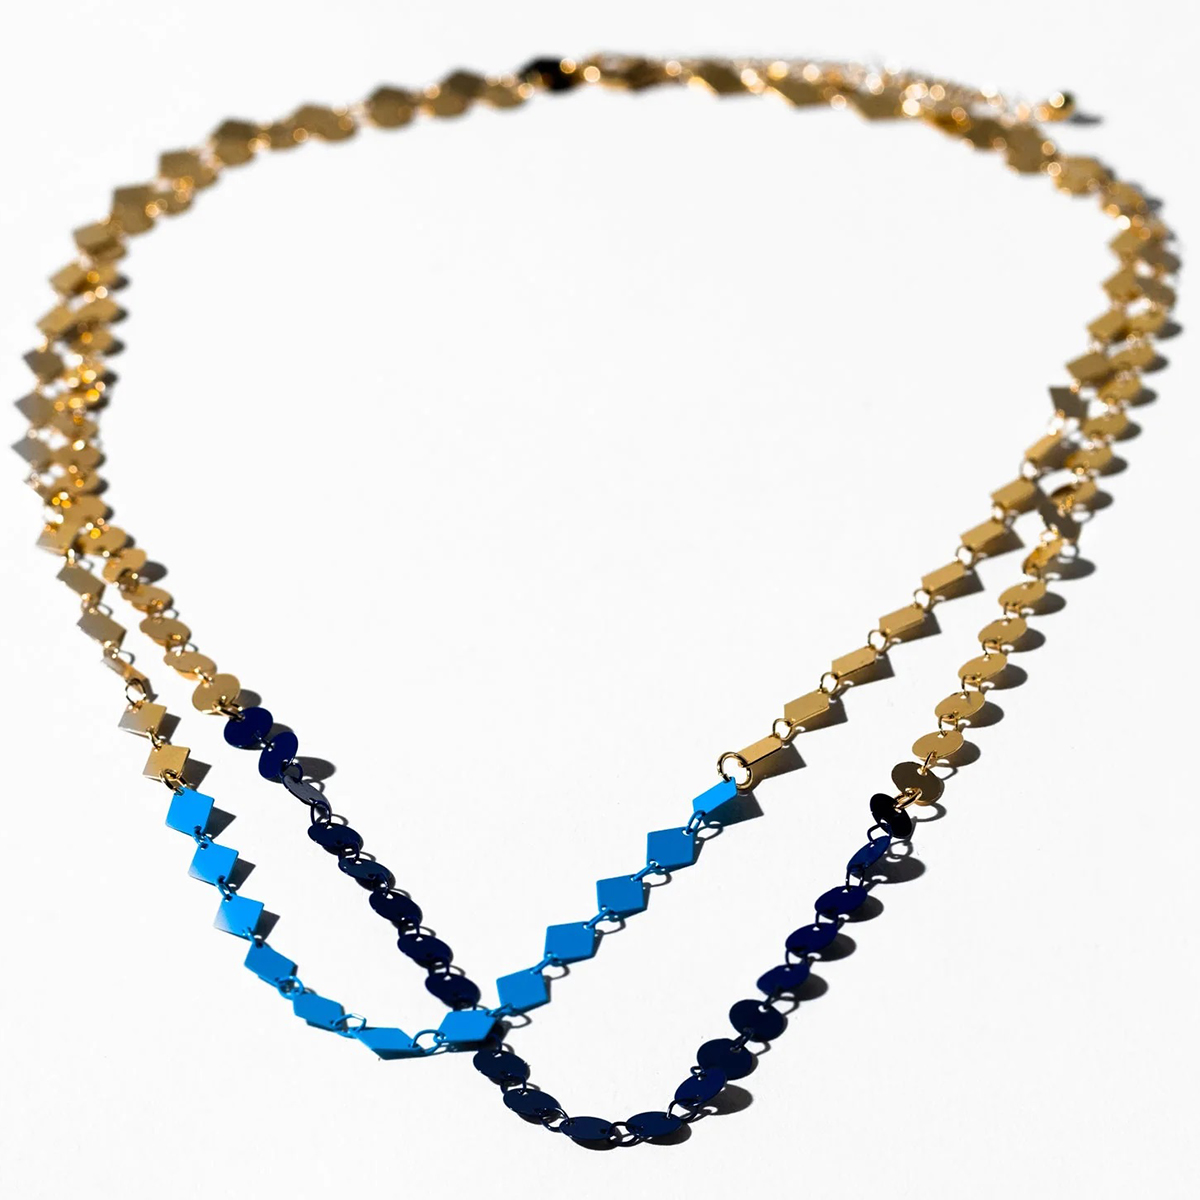 Charming Charlie Blue Necklace, 2 Piece